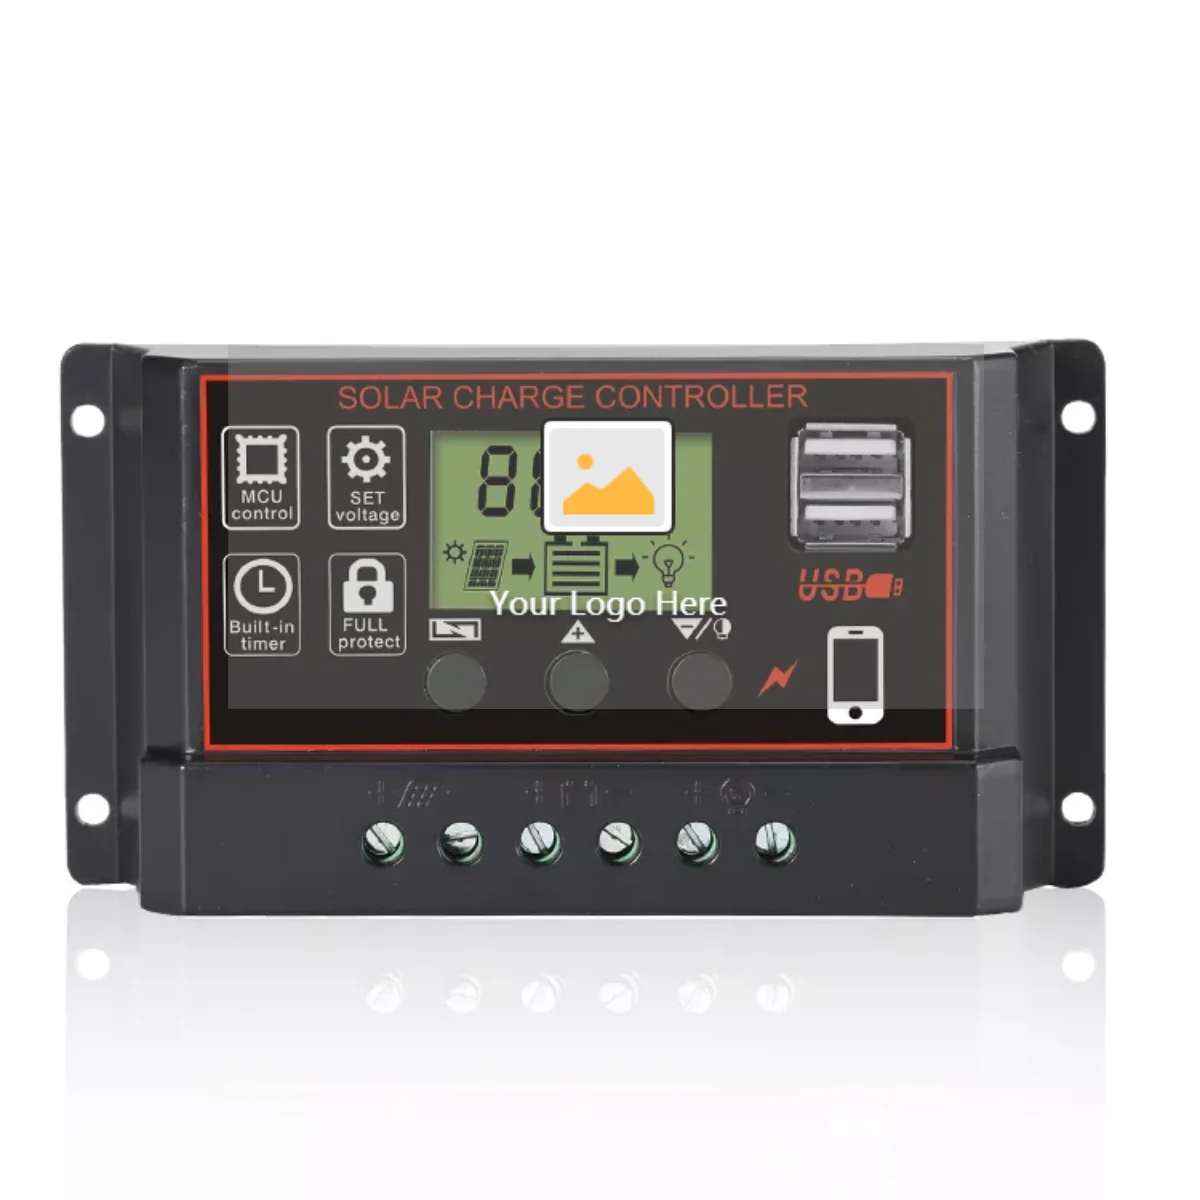 Solar Panel Regulator Charge Controller USB 60A 12V-24V with Dual USB Charger,American Warehouse Shipment 